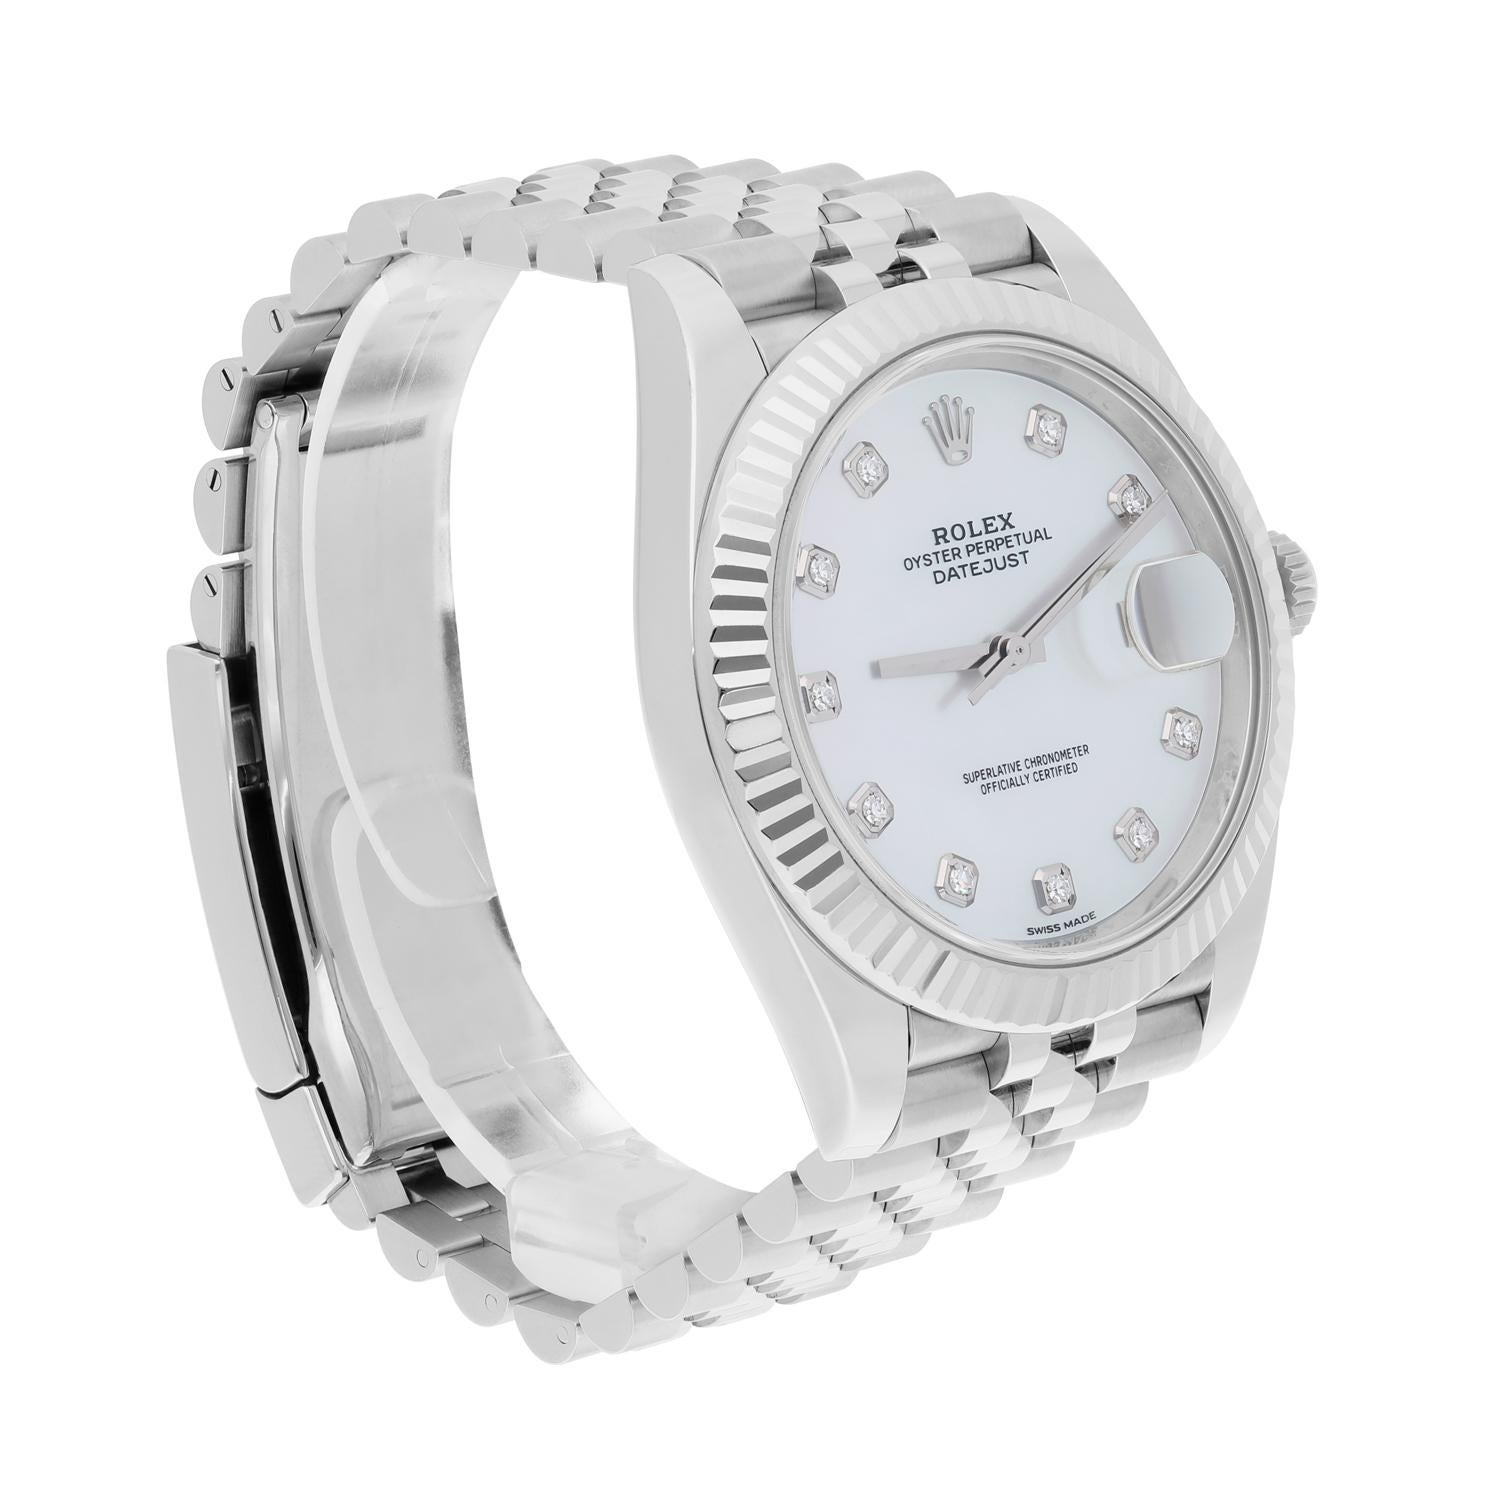 Rolex Datejust 41 Steel/18K White Gold White Mother of Pearl Dial Jubilee 126334 In Excellent Condition For Sale In New York, NY